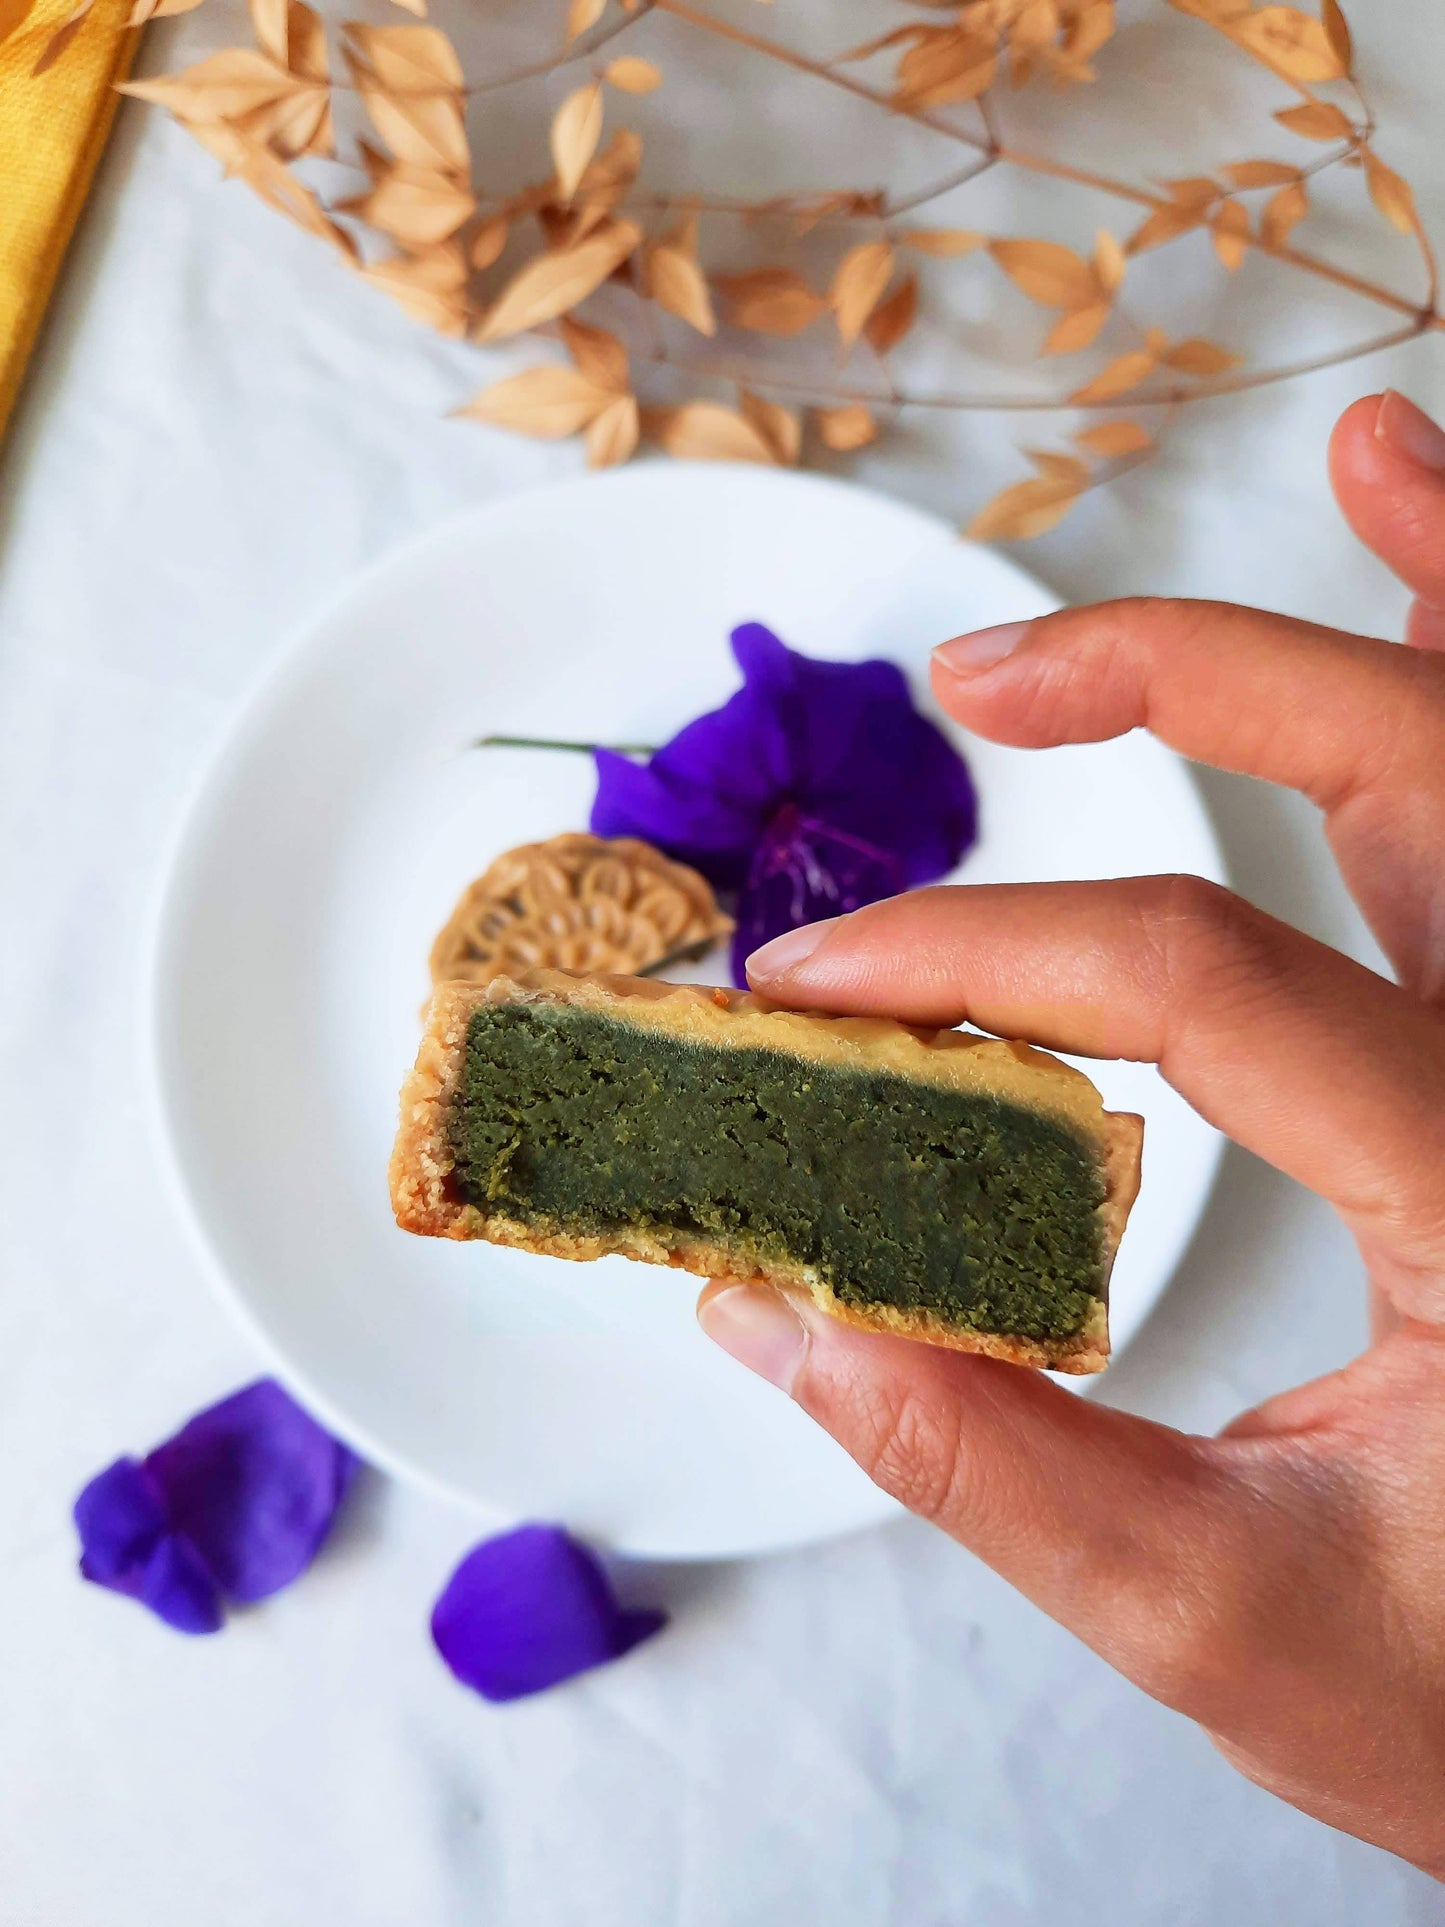 Hand holding up half a jasmine tea mooncake towards the camera. Jasmine tea filling showing to the camera. Background is the second half of the mooncake with leaves and purple flower petals.